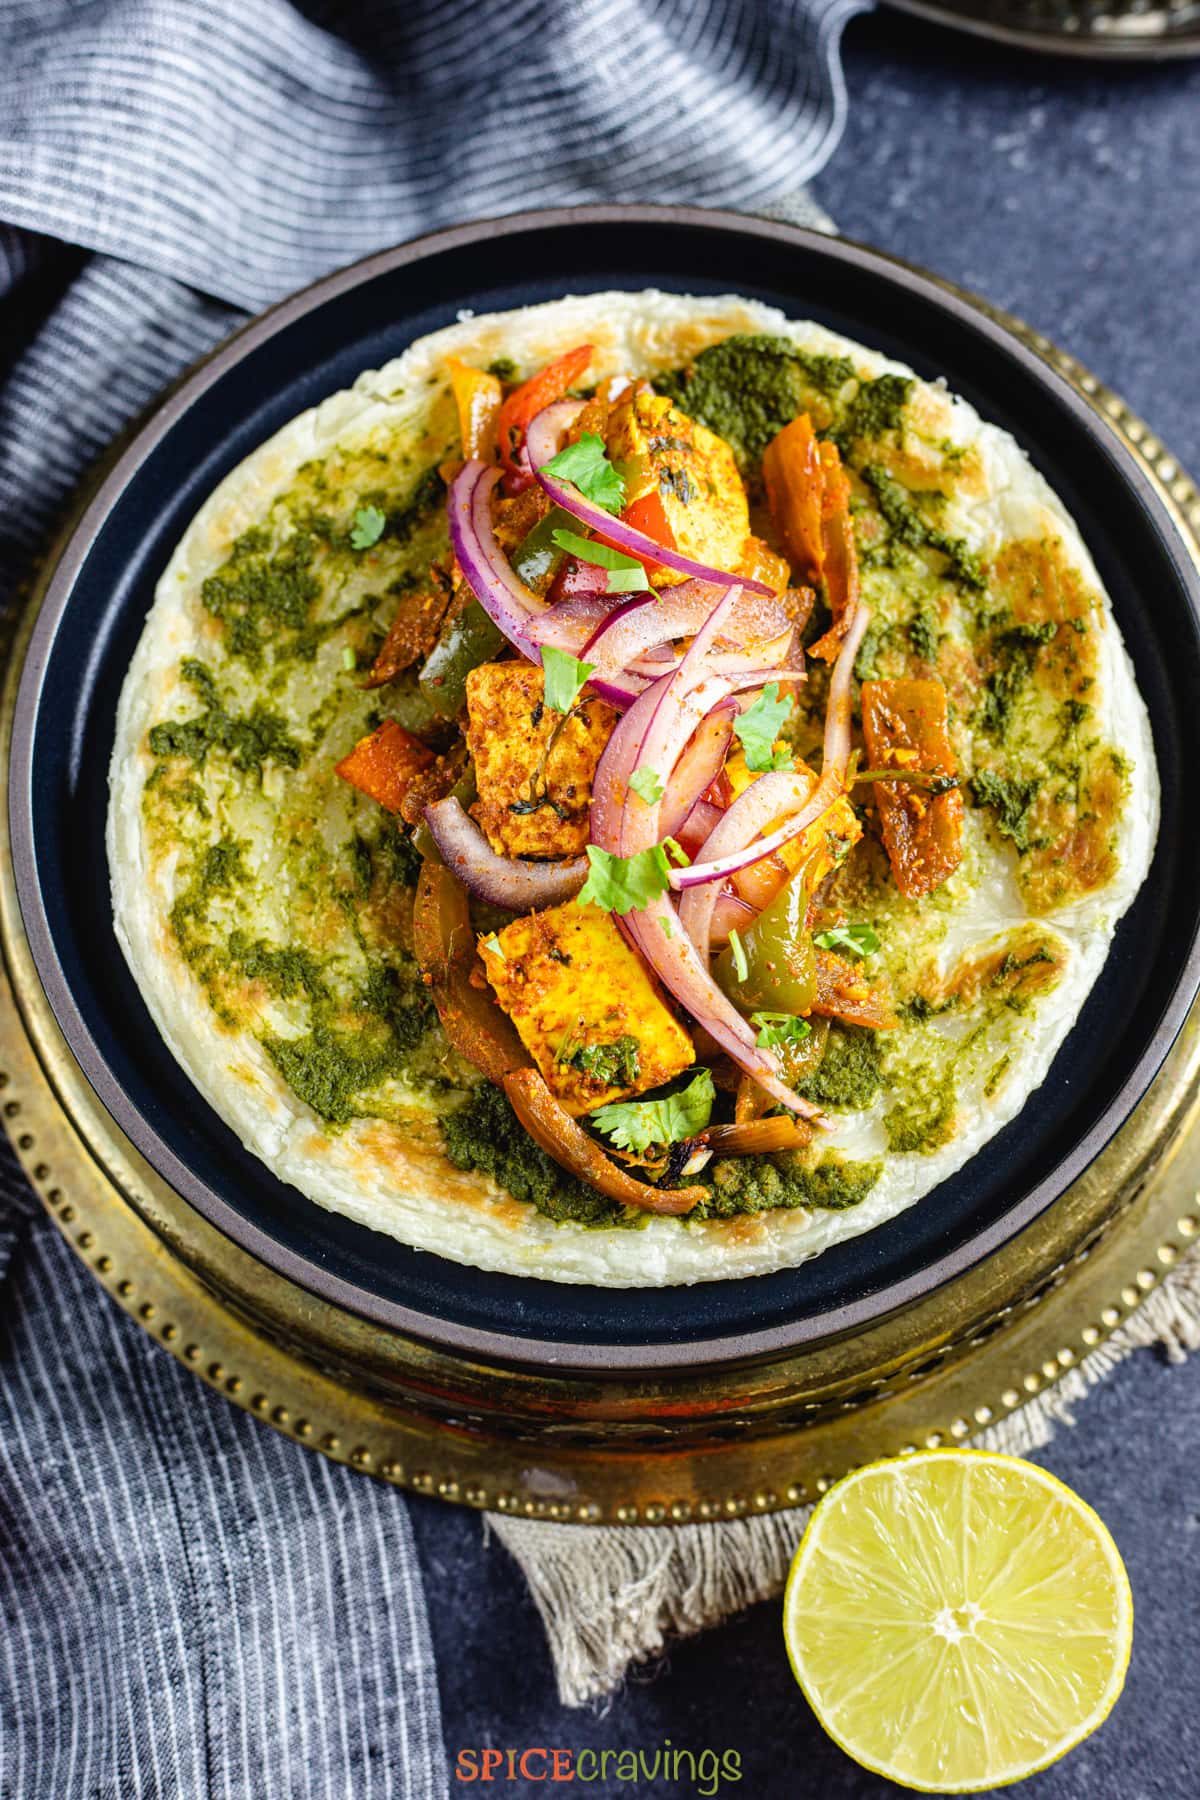 A paratha stuffed with veggies and marinated paneer